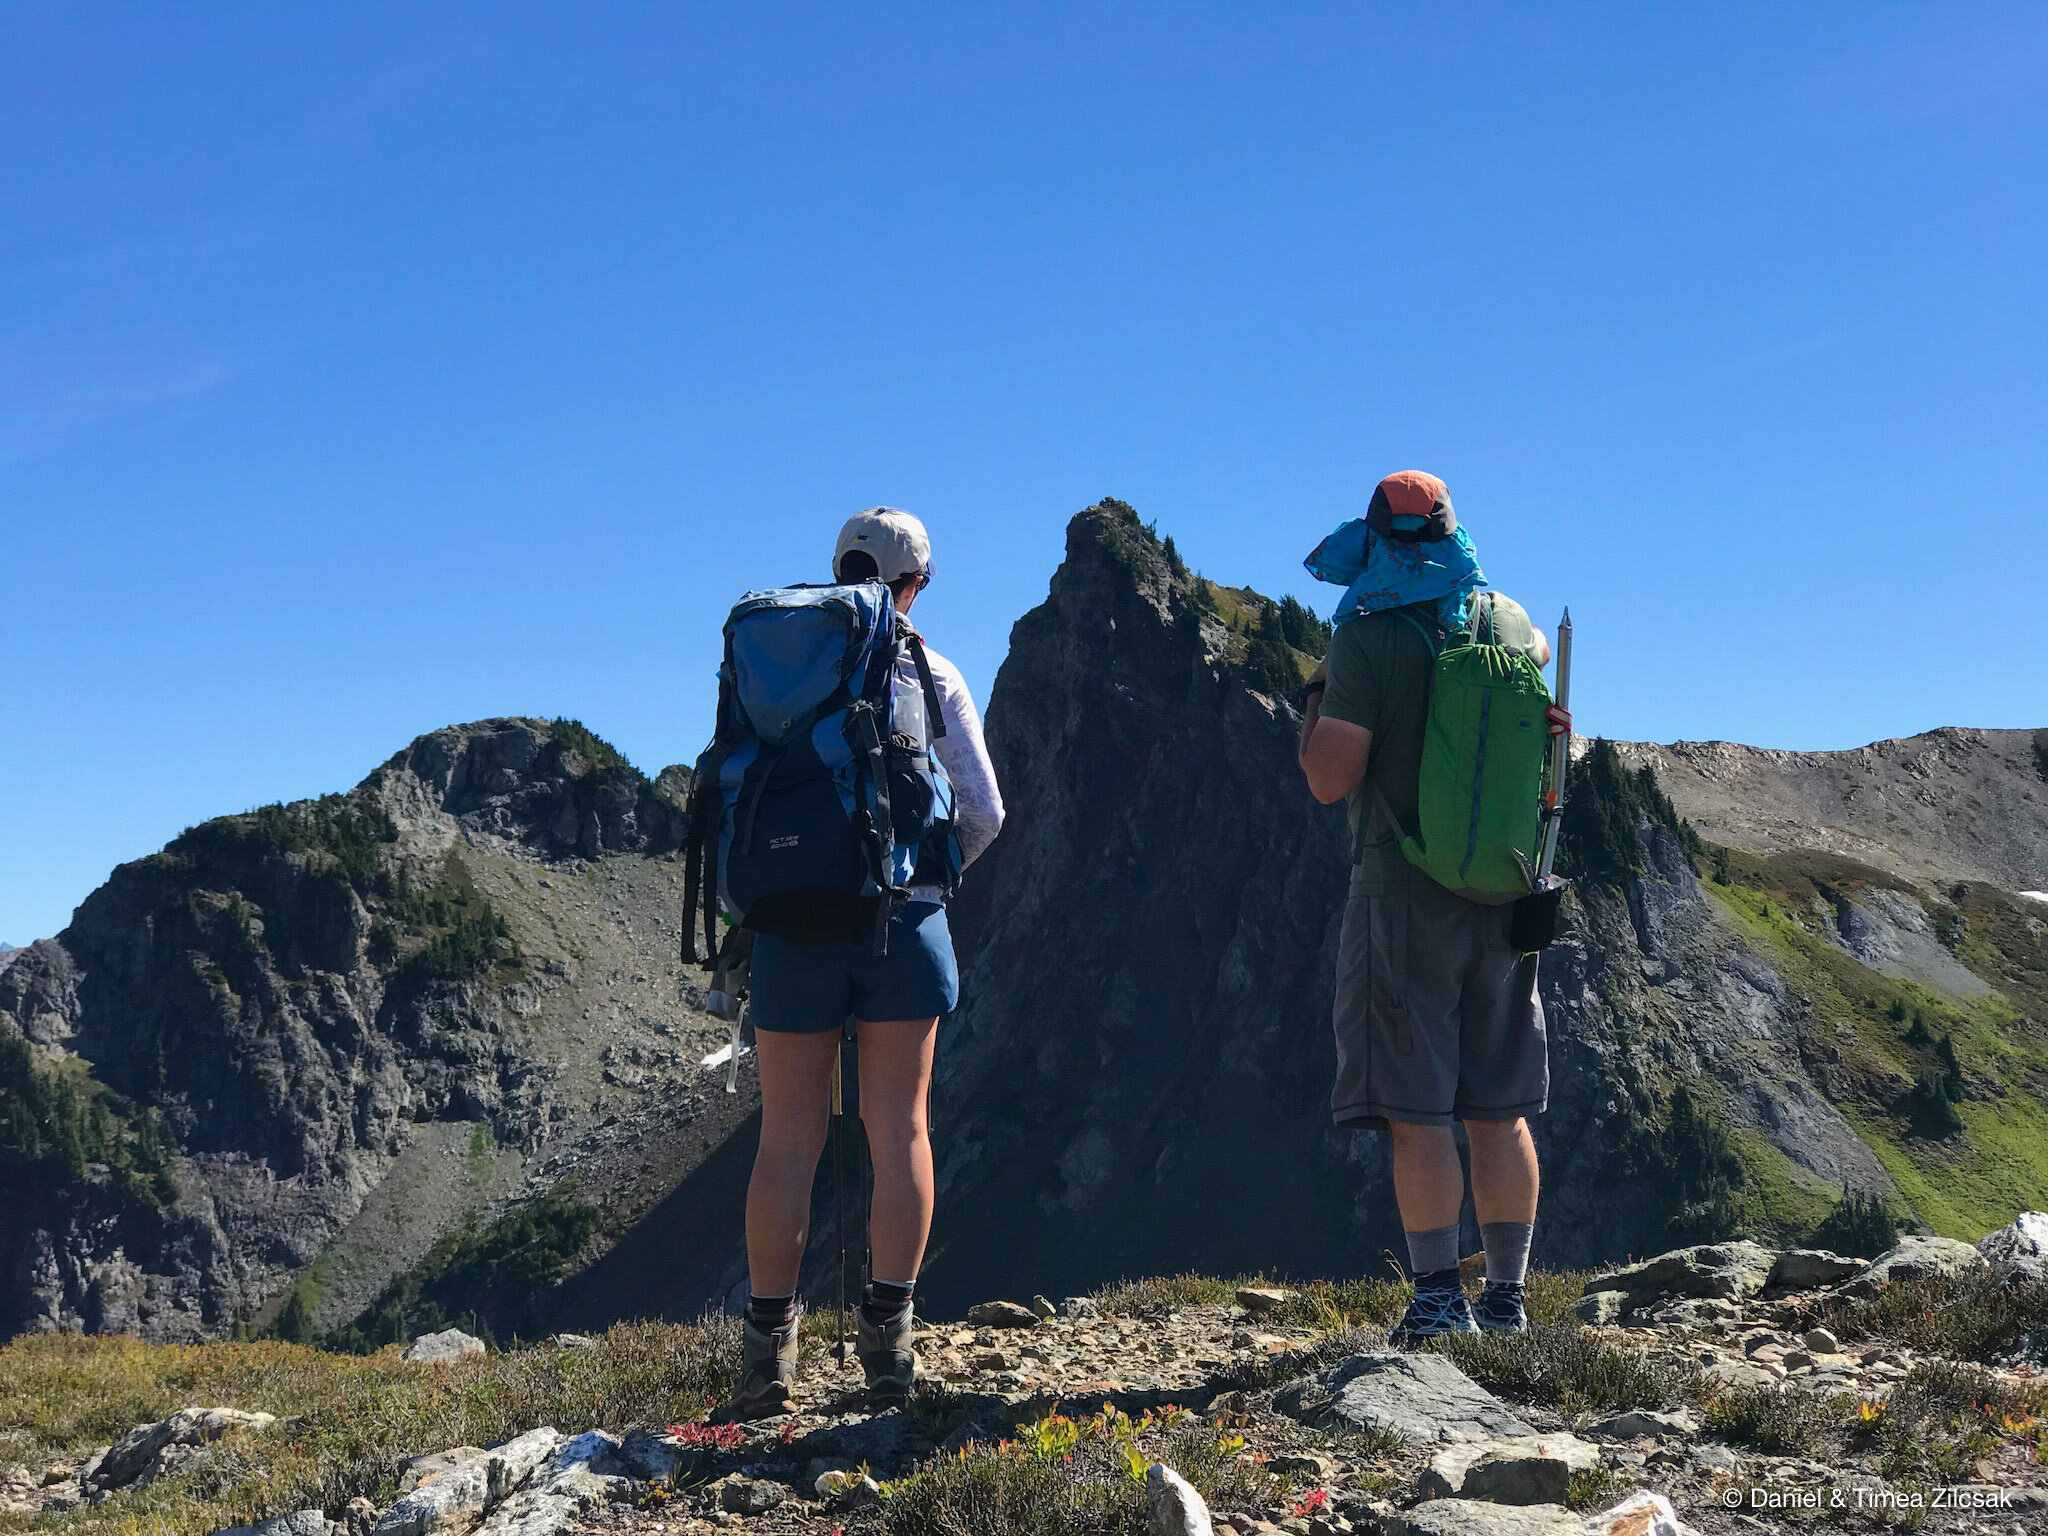 Checking out the summit of Yellow Aster Butte from the trail to Tomyhoi Peak